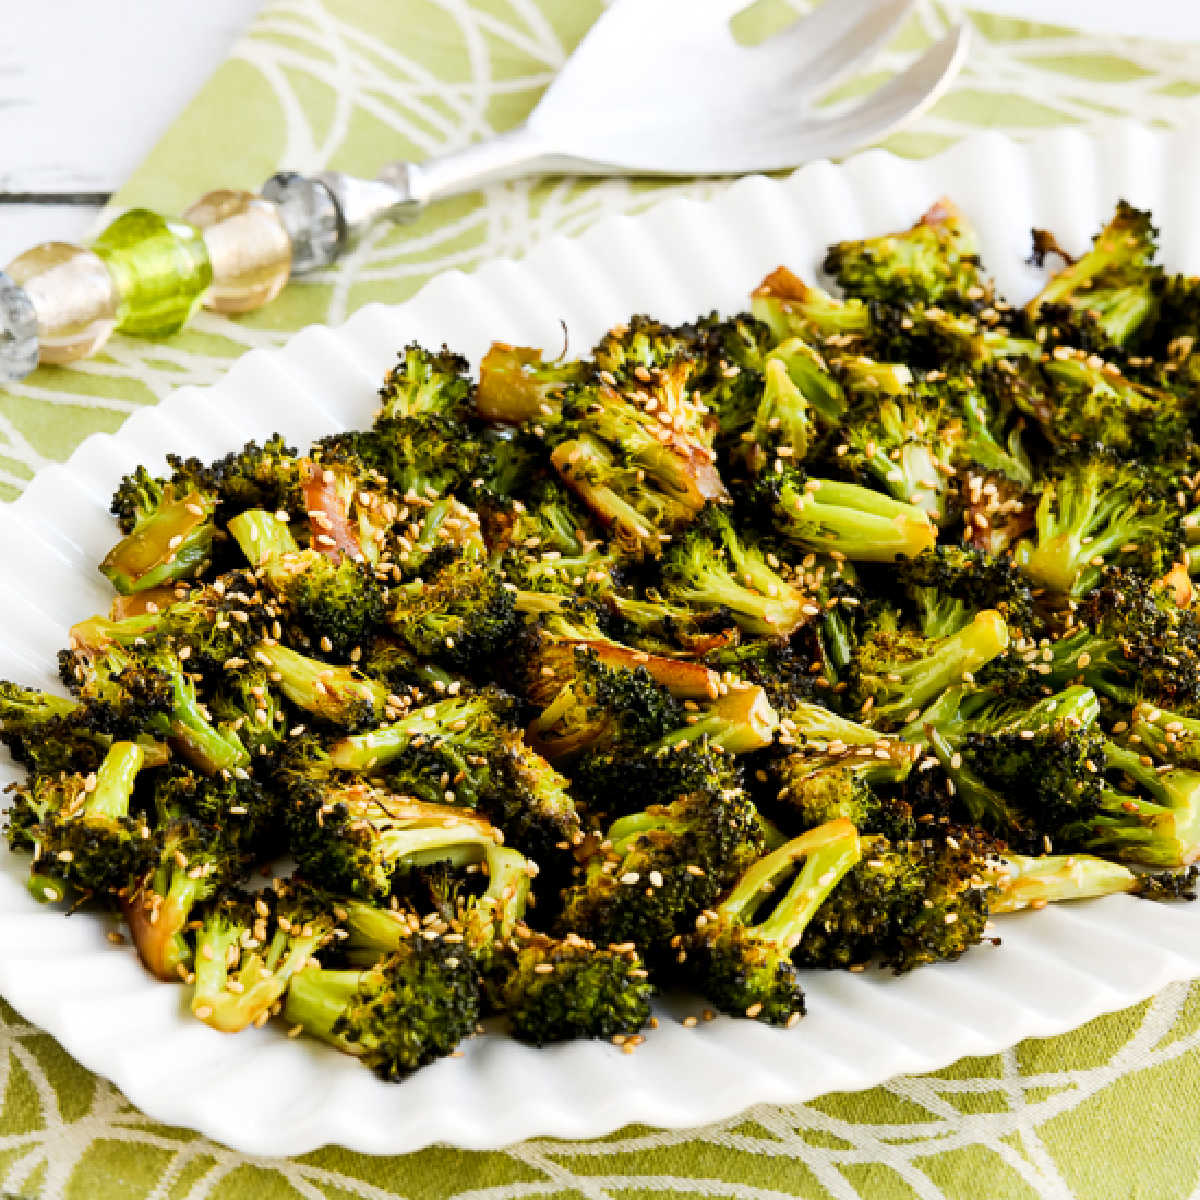 Quick Roasted Broccoli with Soy Sauce and Sesame shown on serving plate, square image